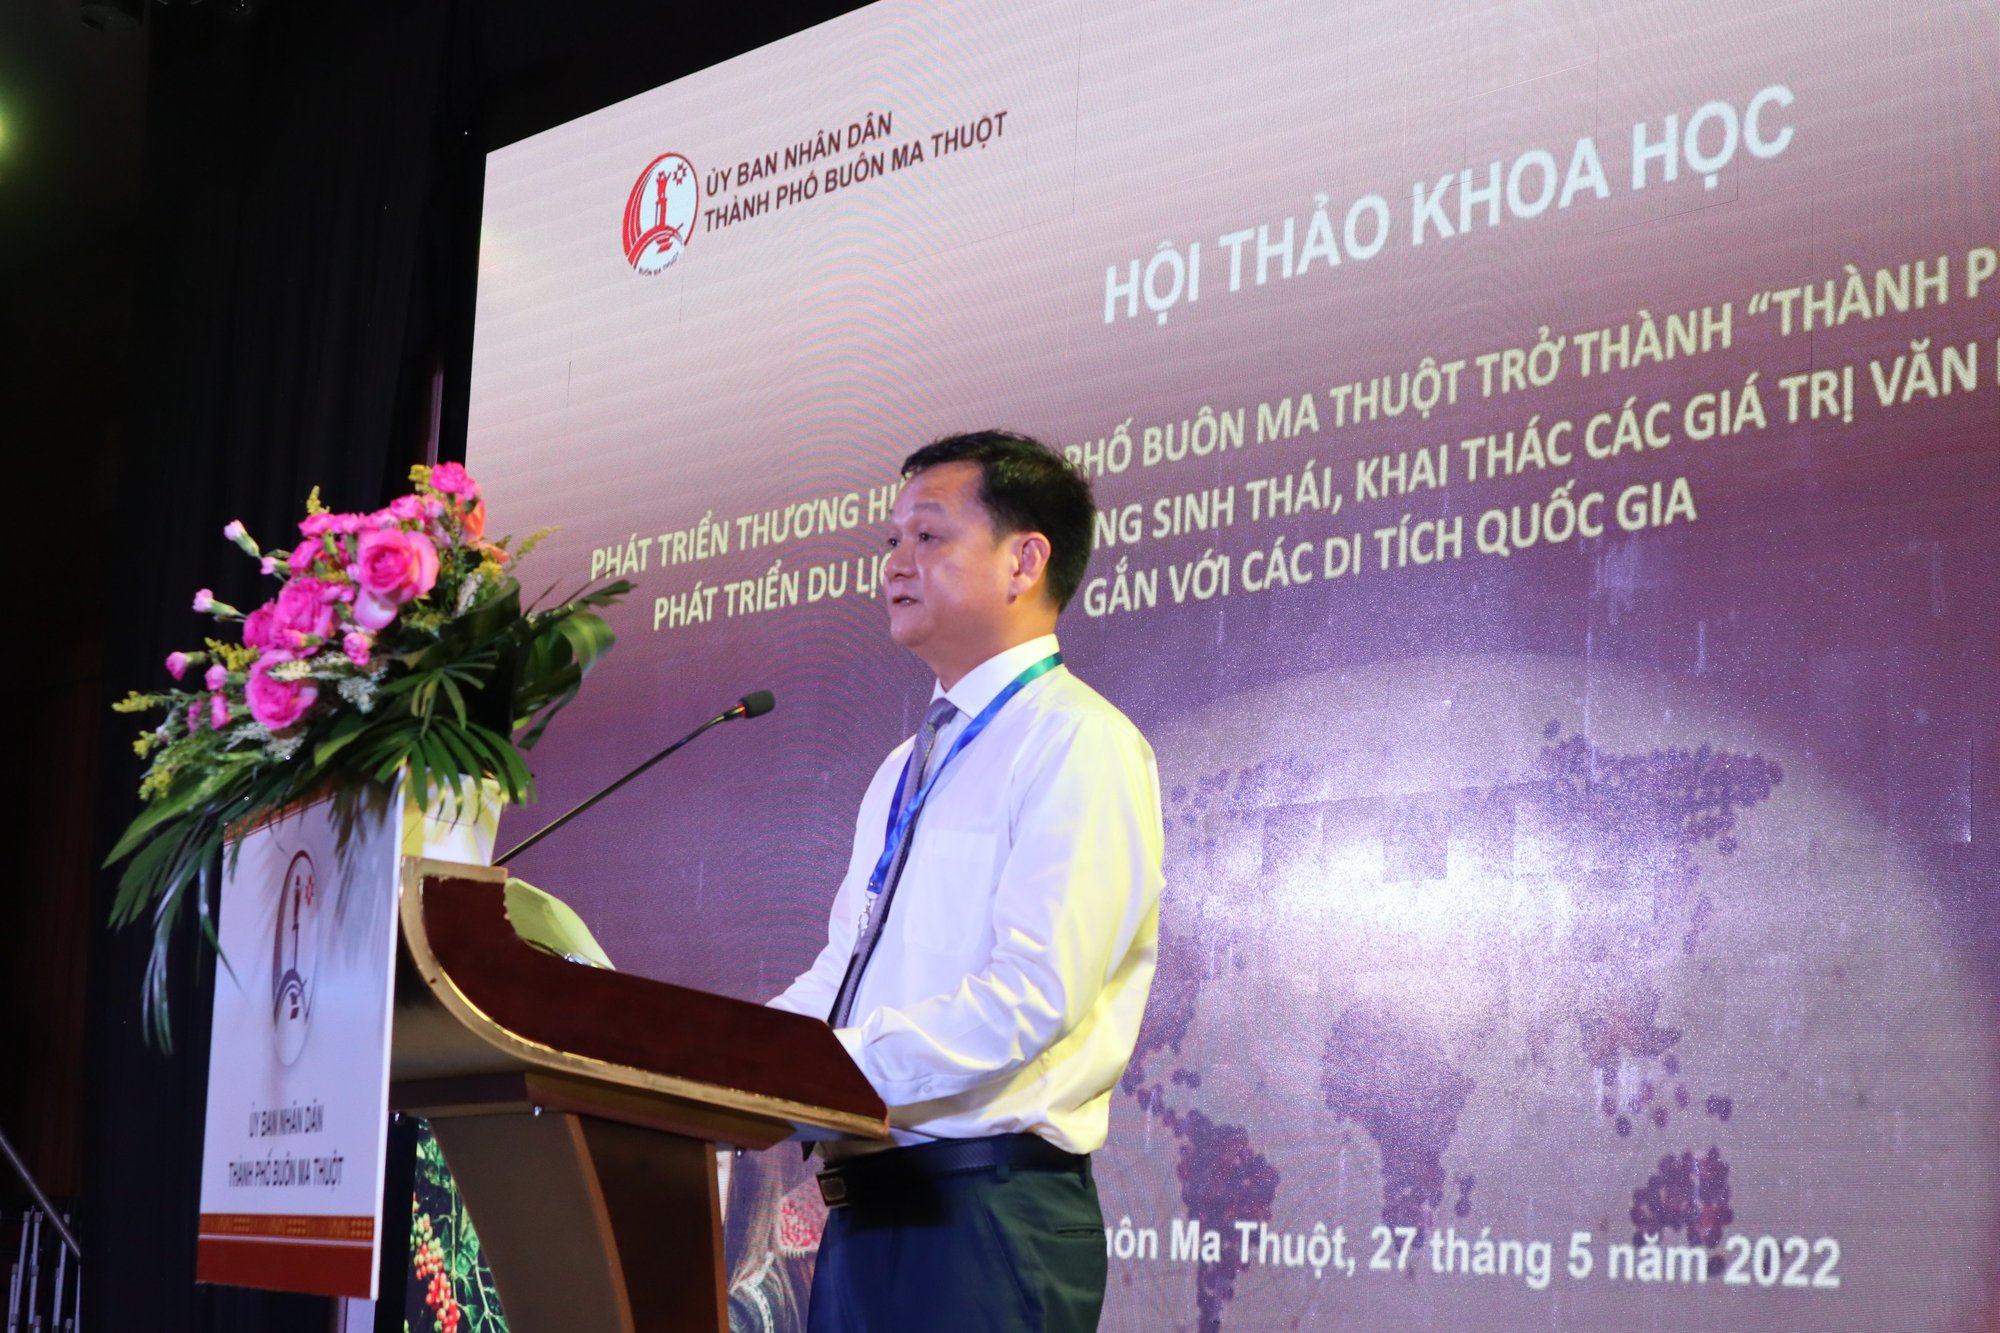 The conference aims to develop Buon Ma Thuot City to become 